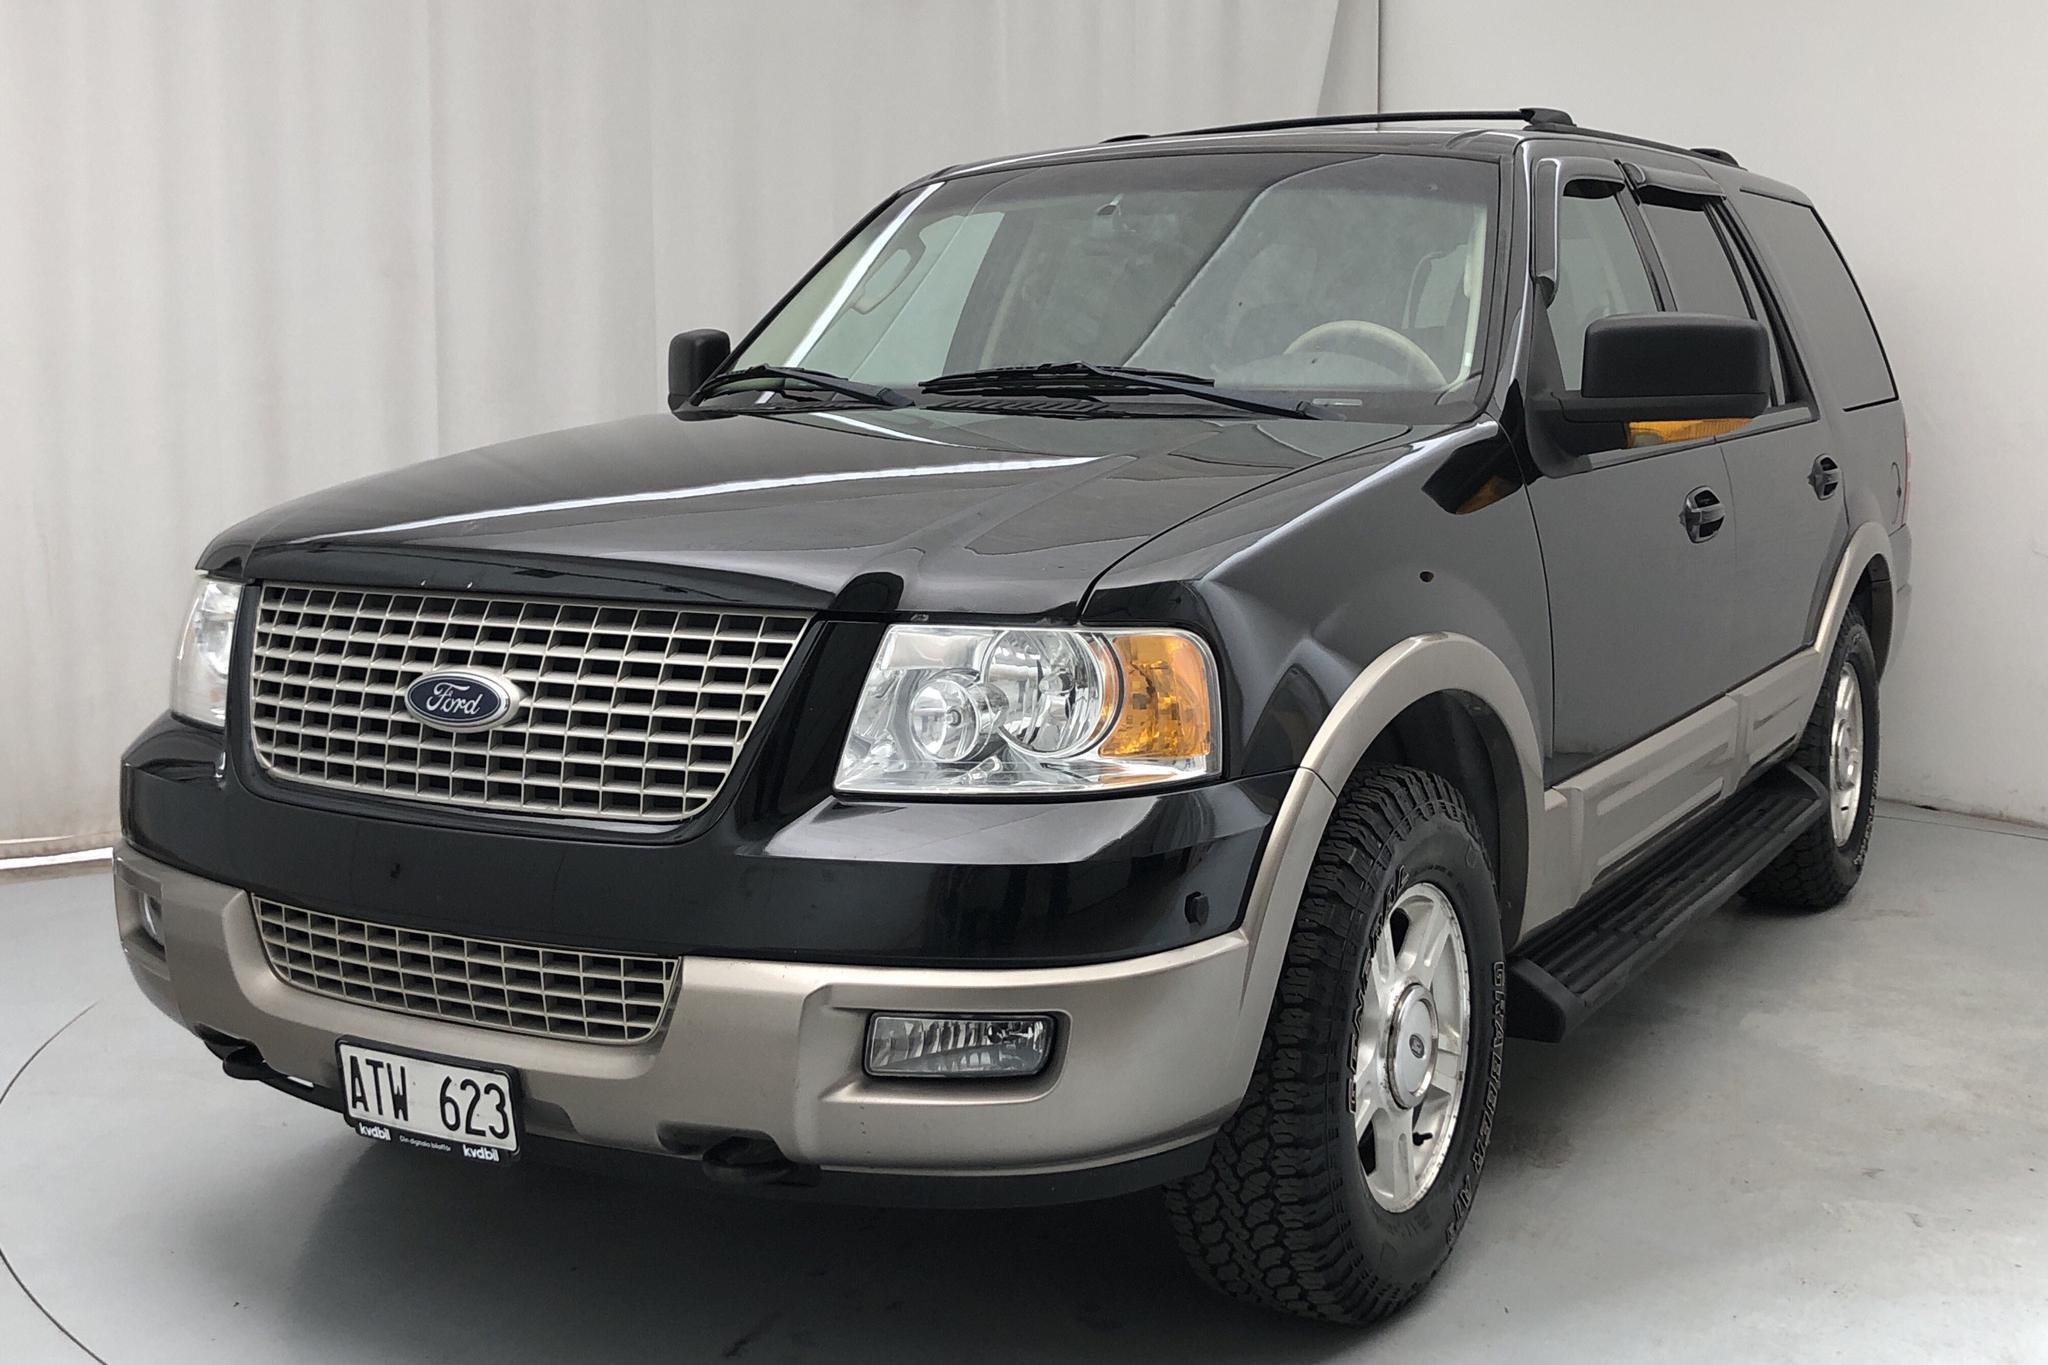 Ford Expedition 5.4 V8 (264hk) - 187 040 km - Automatic - black - 2003